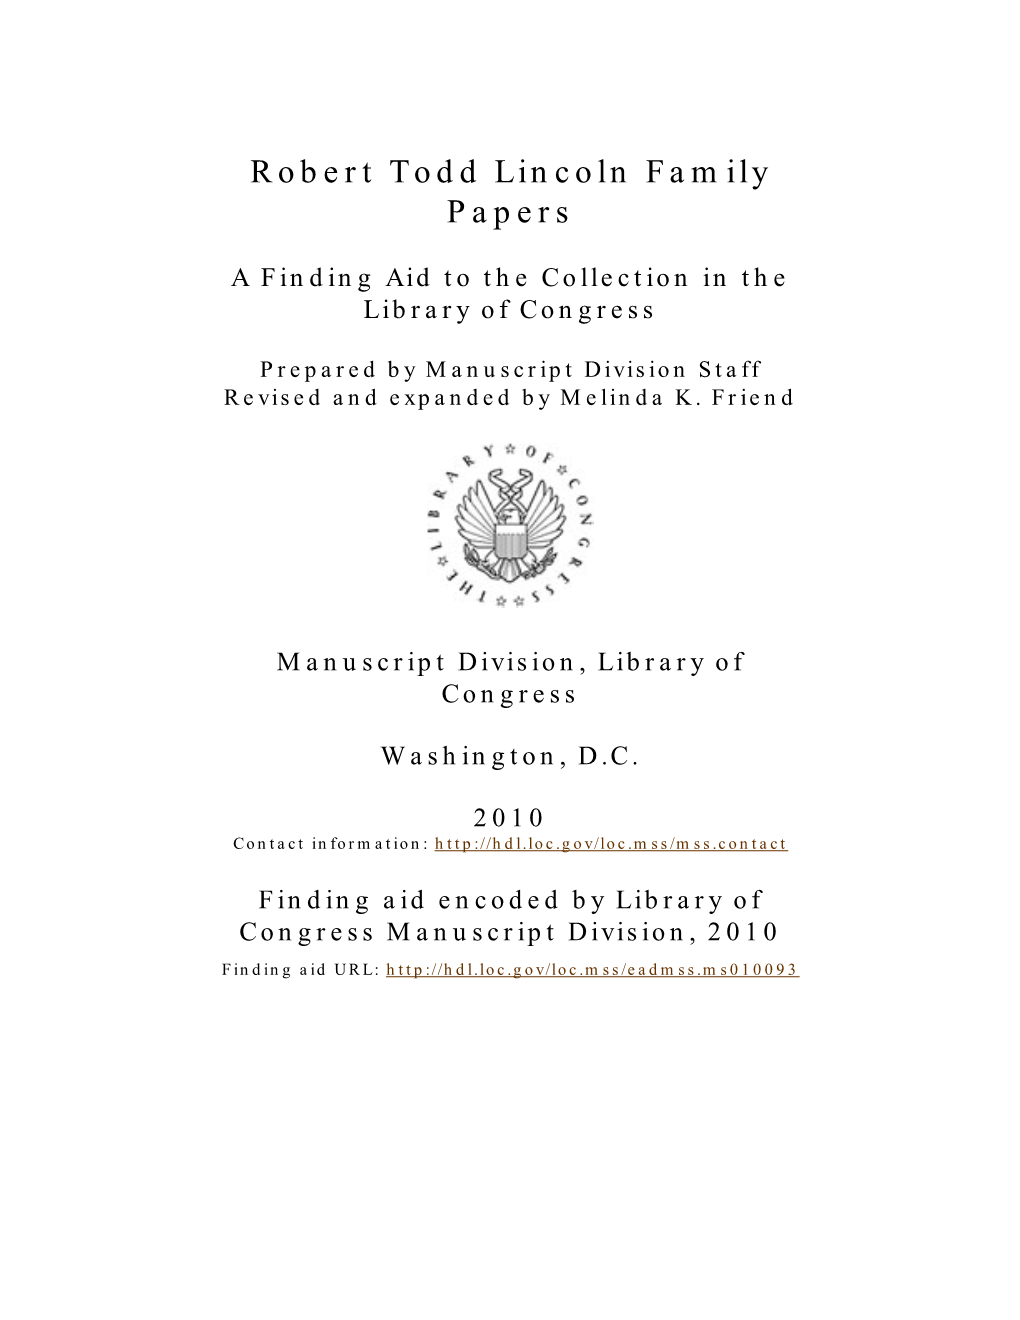 Robert Todd Lincoln Family Papers